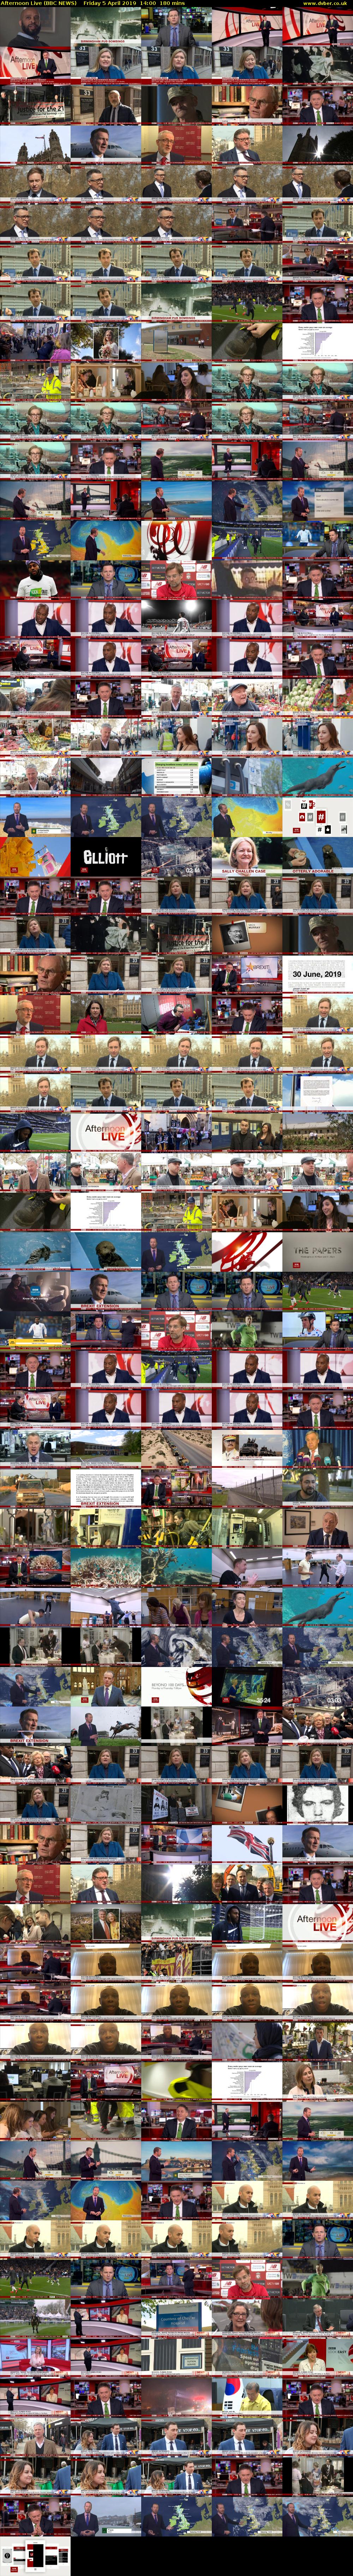 Afternoon Live (BBC NEWS) Friday 5 April 2019 14:00 - 17:00